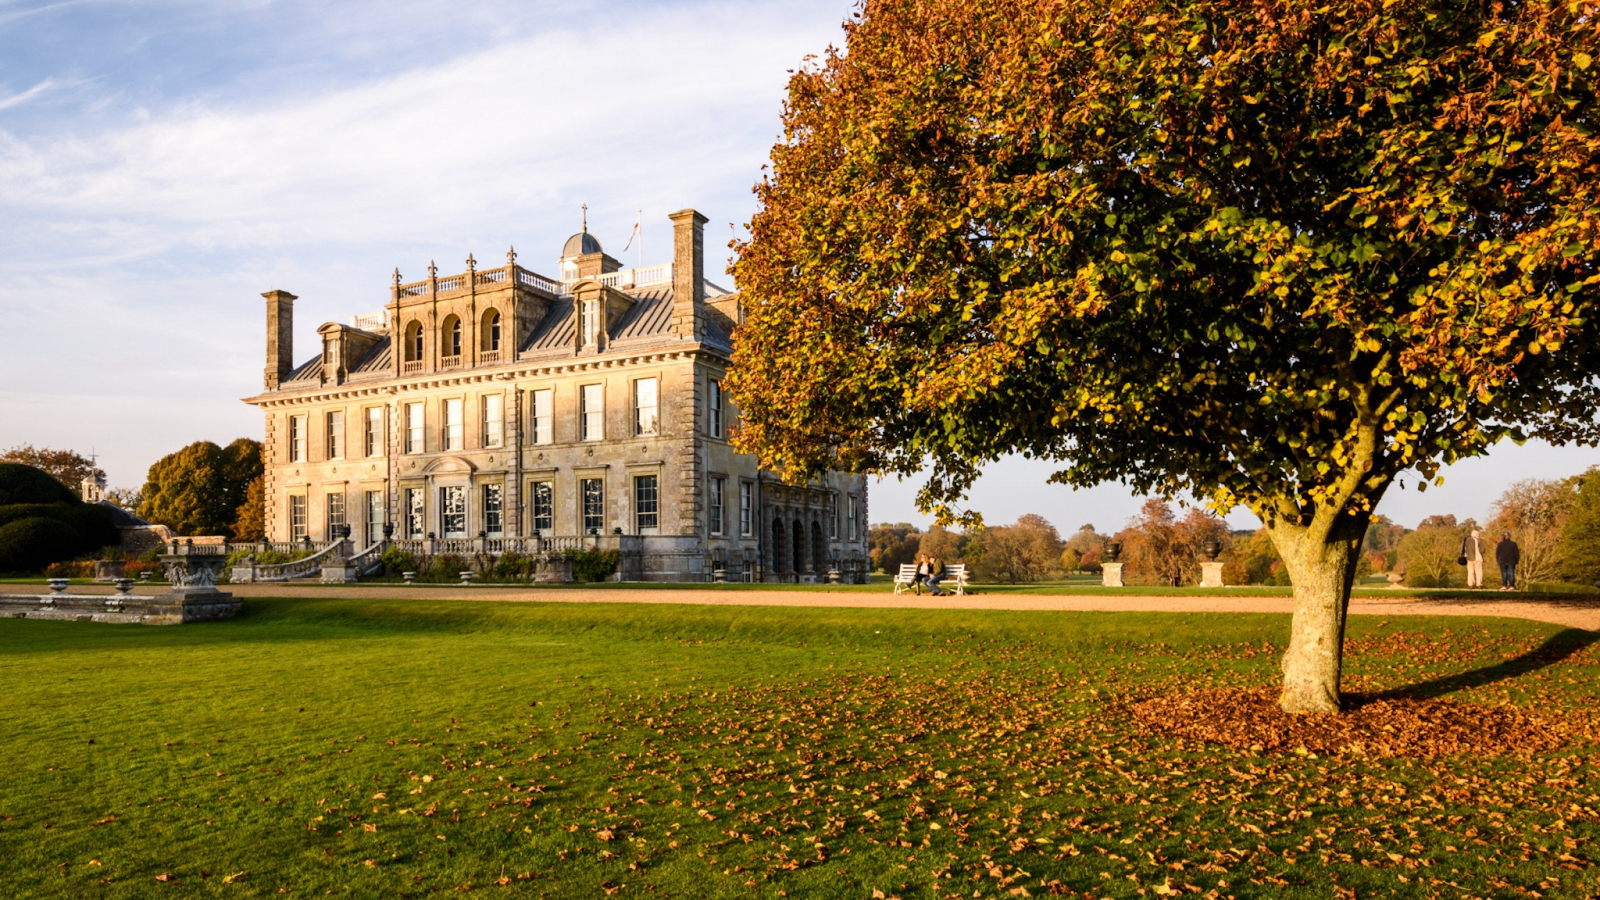 An image showing Kingston Lacy, a National Trust site in the UK